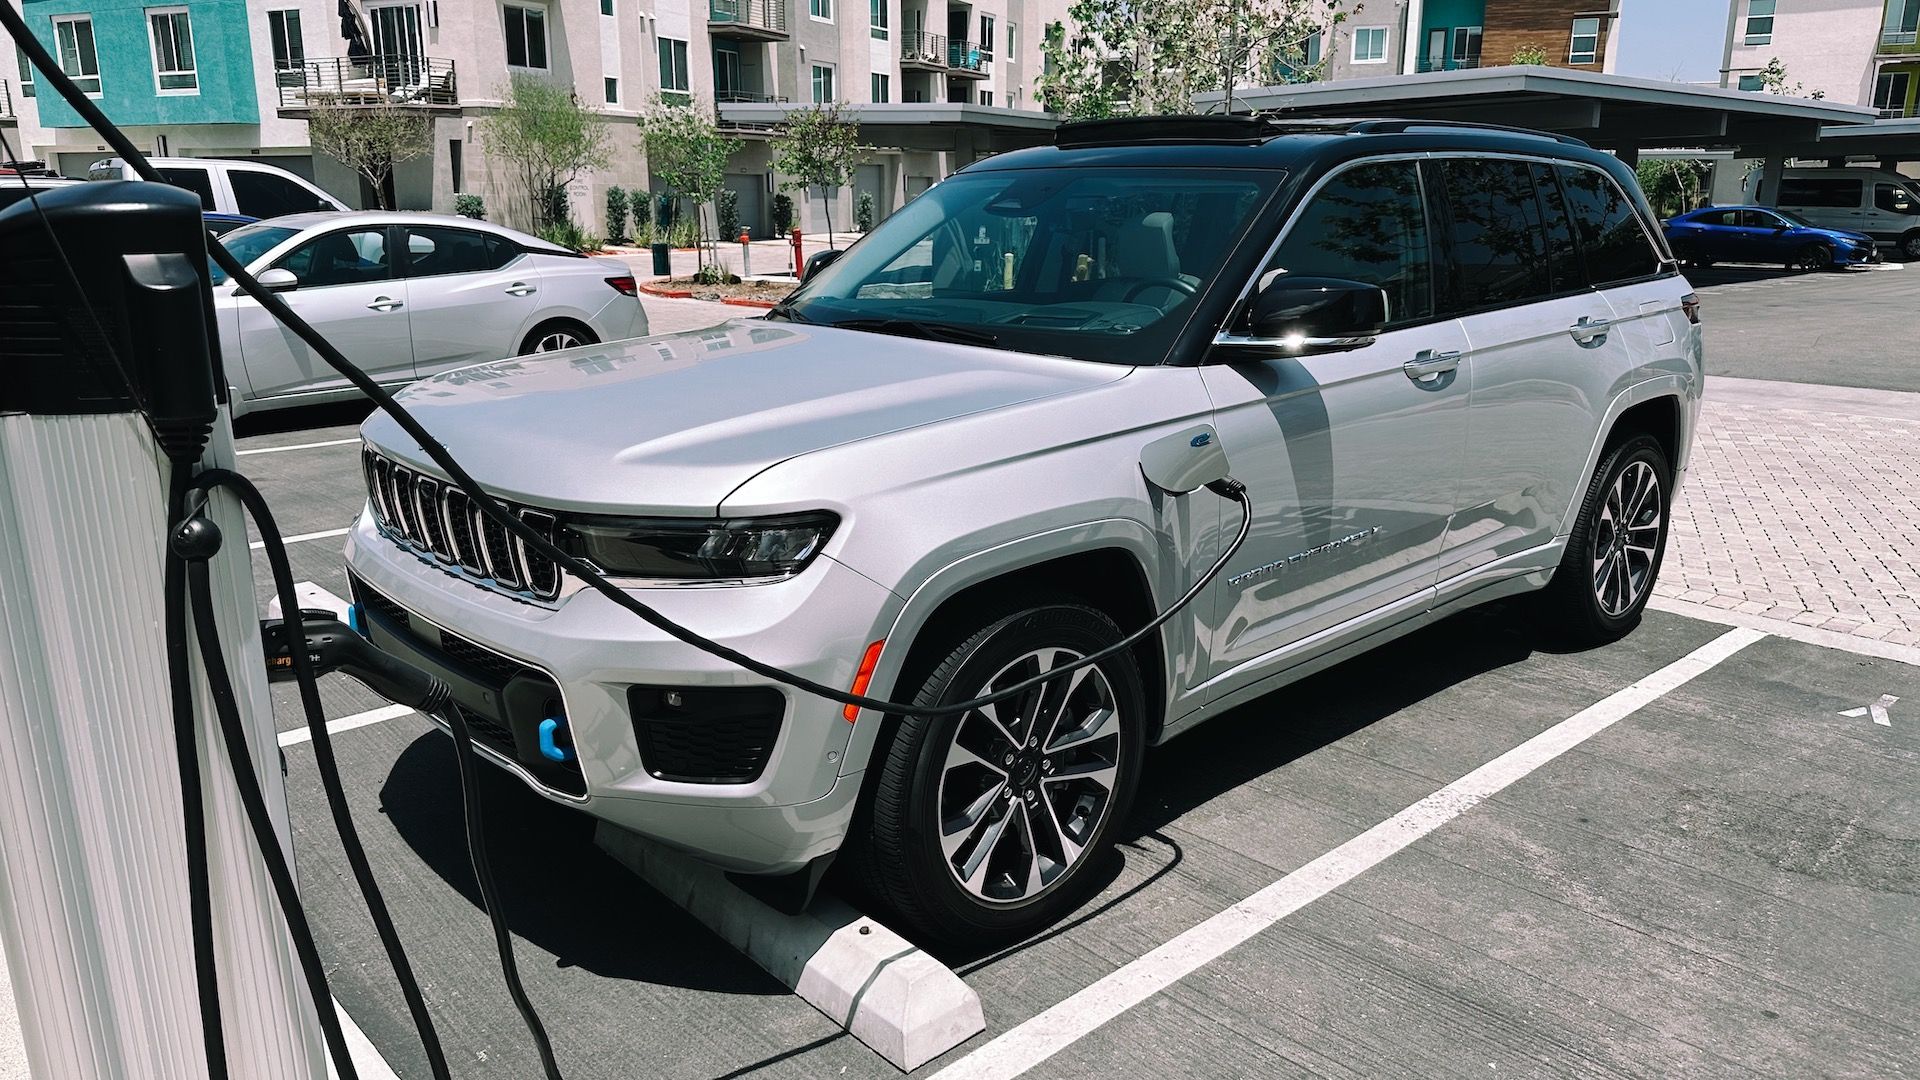 Showing the Grand Cherokee 4xe plugged into a public charging station